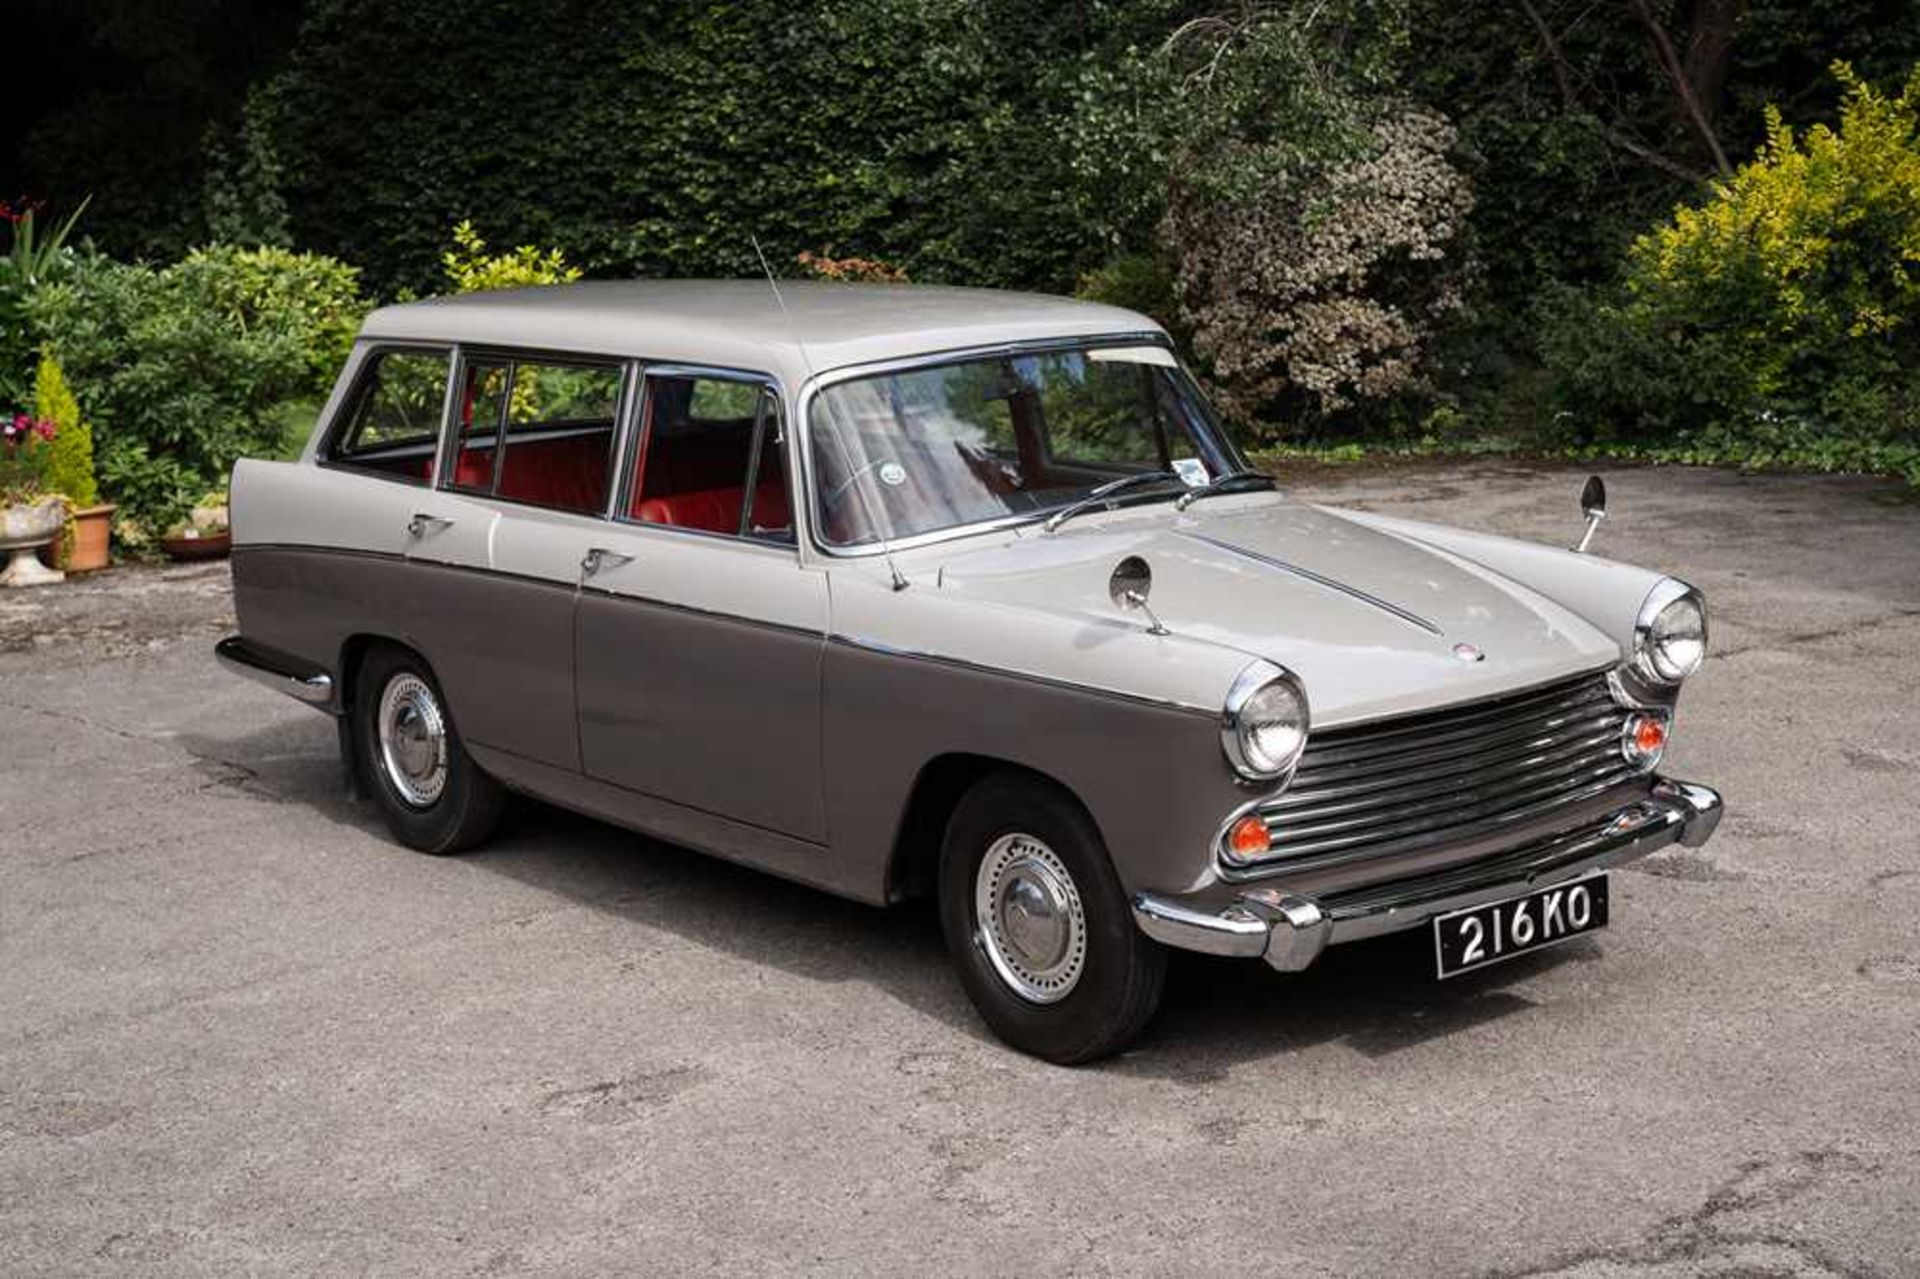 1964 Morris Oxford Series VI Farina Traveller Just 7,000 miles from new - Image 3 of 98